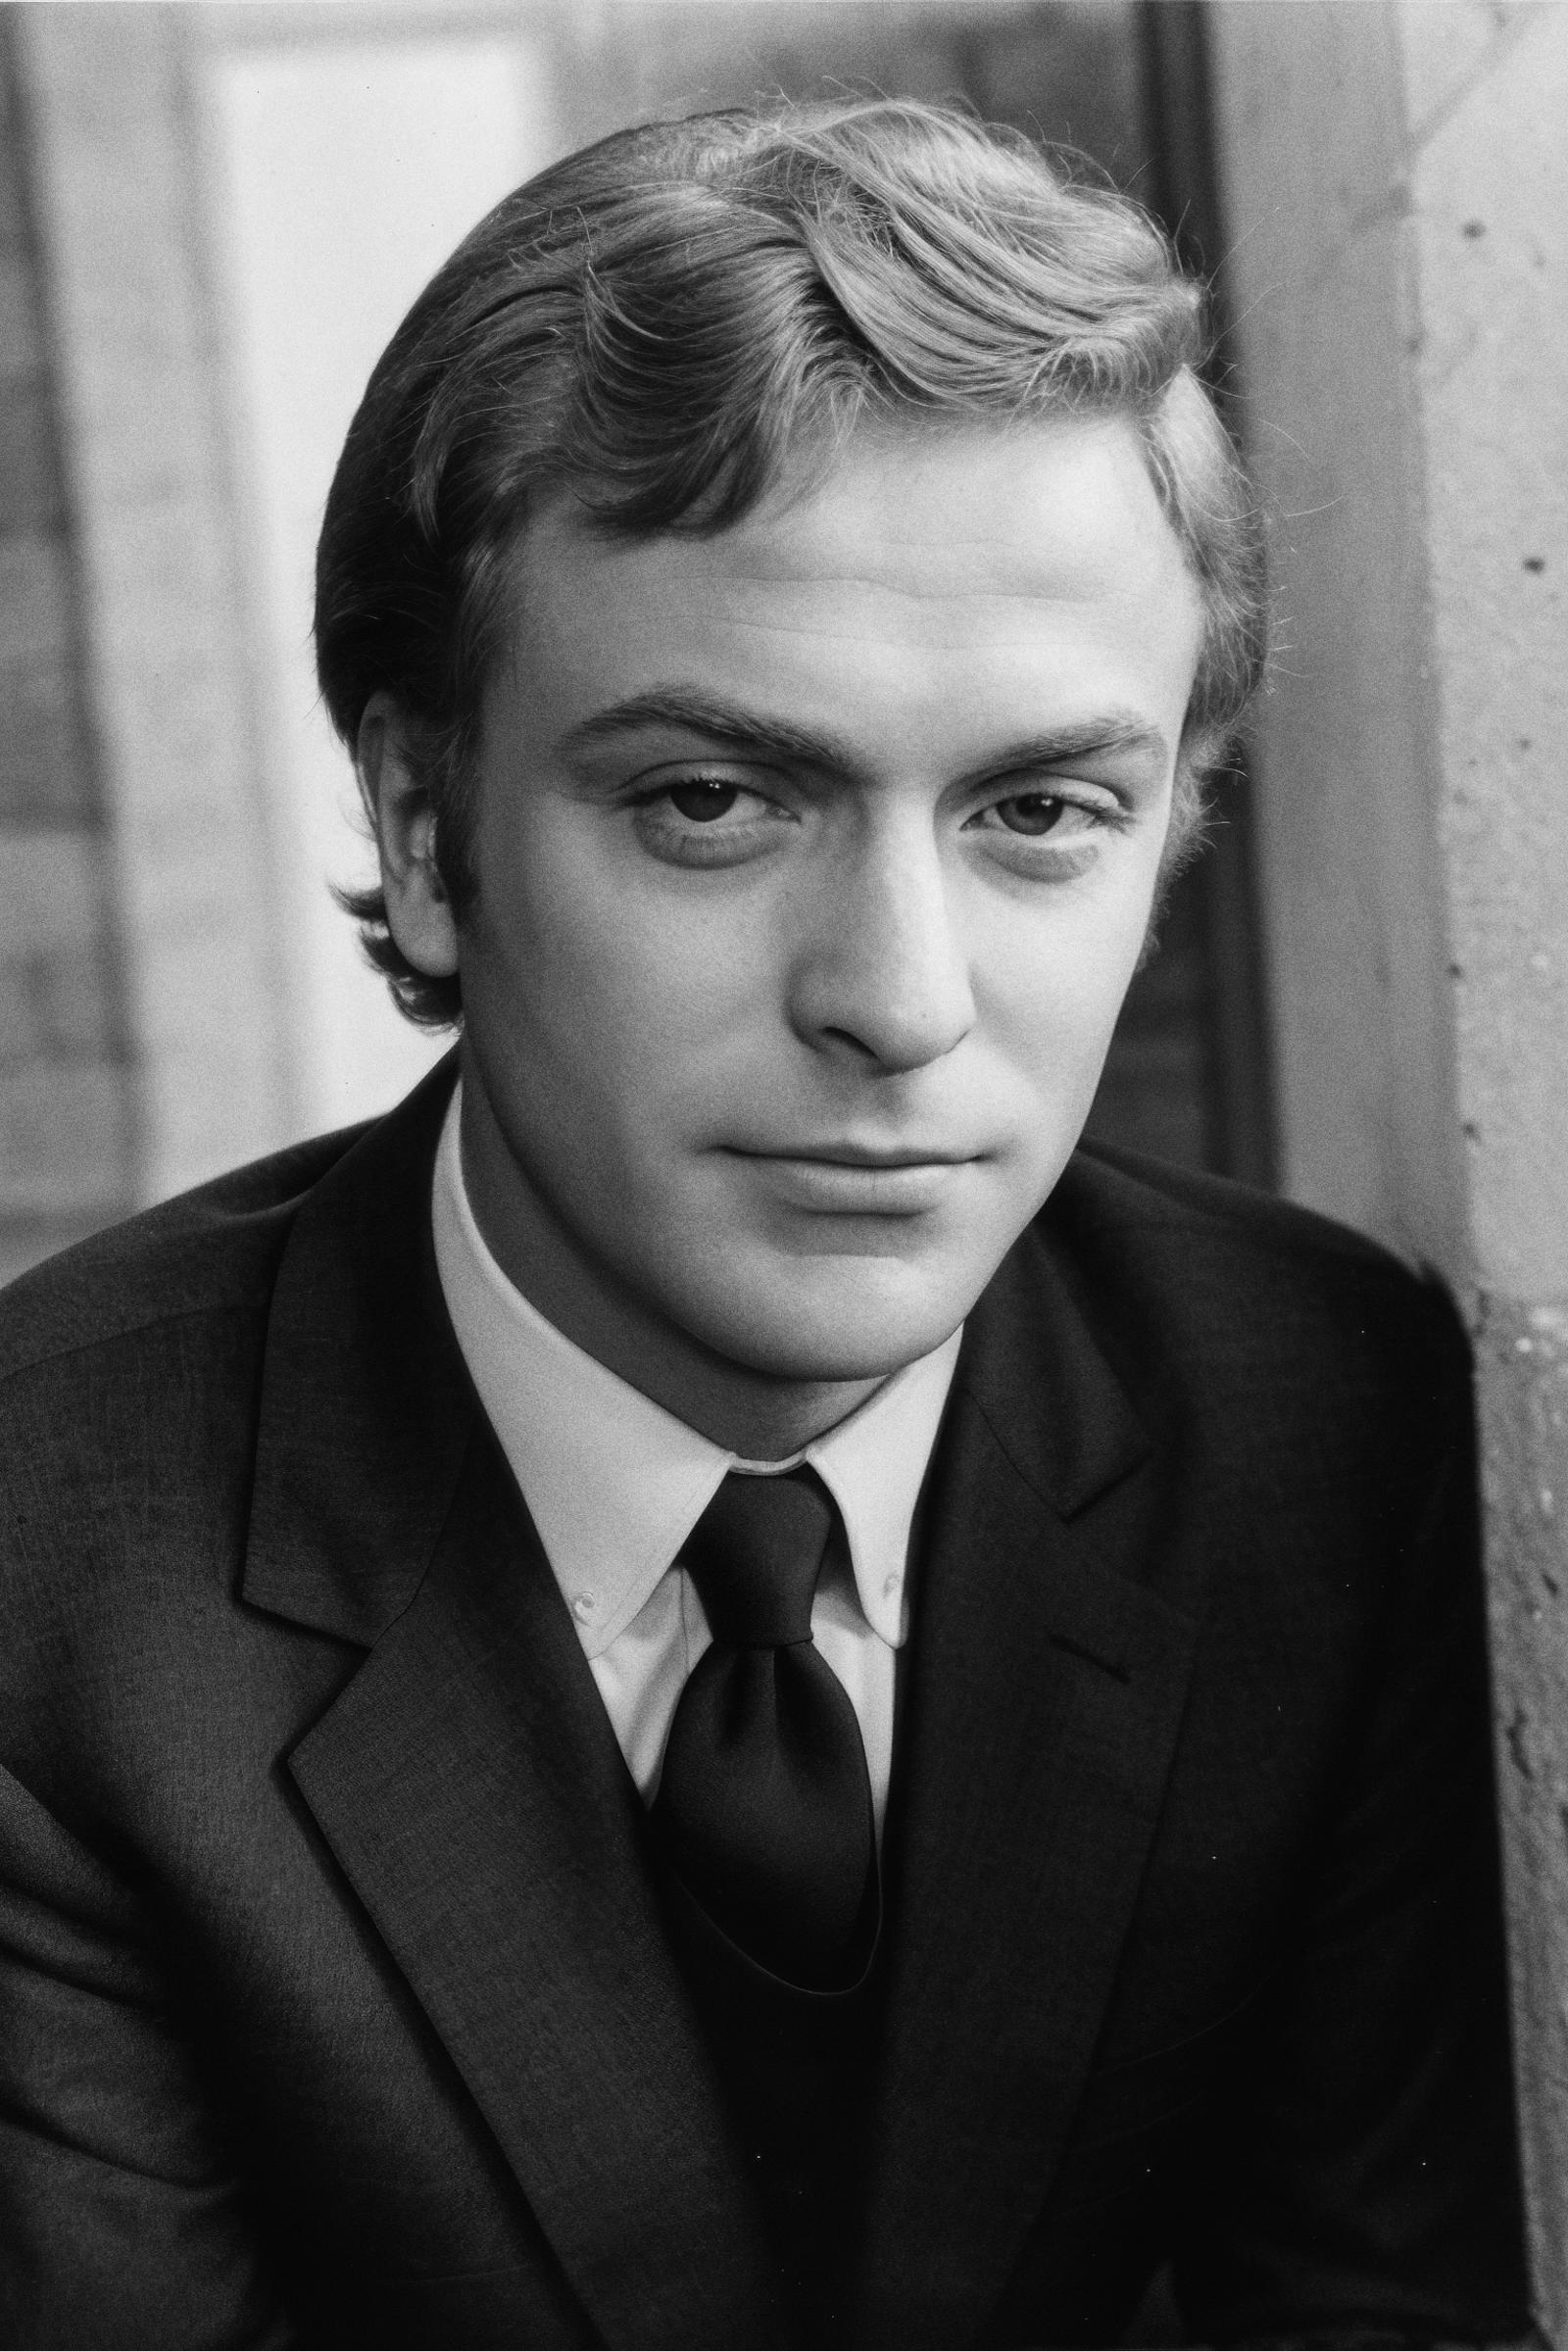 Michael Caine (1960s/1970s) image by Cyberdelia